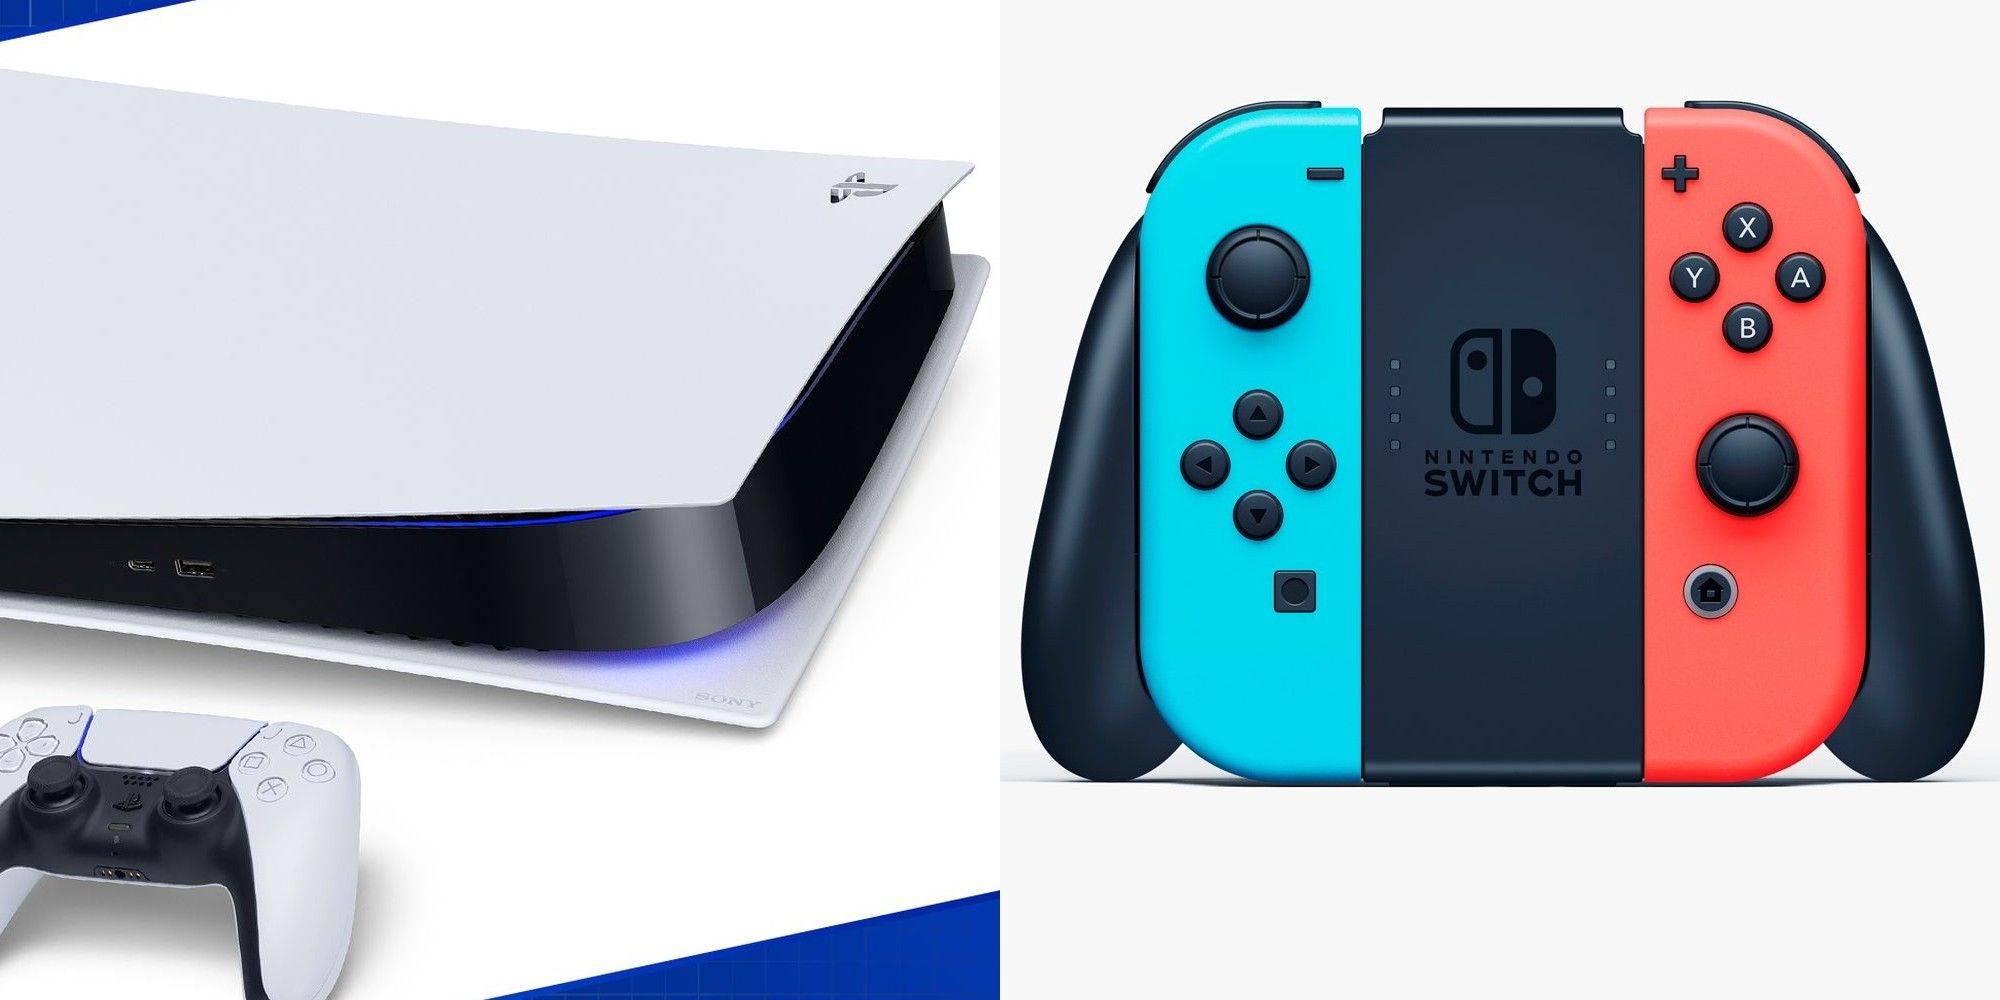 The PS5 sold more units than the Switch